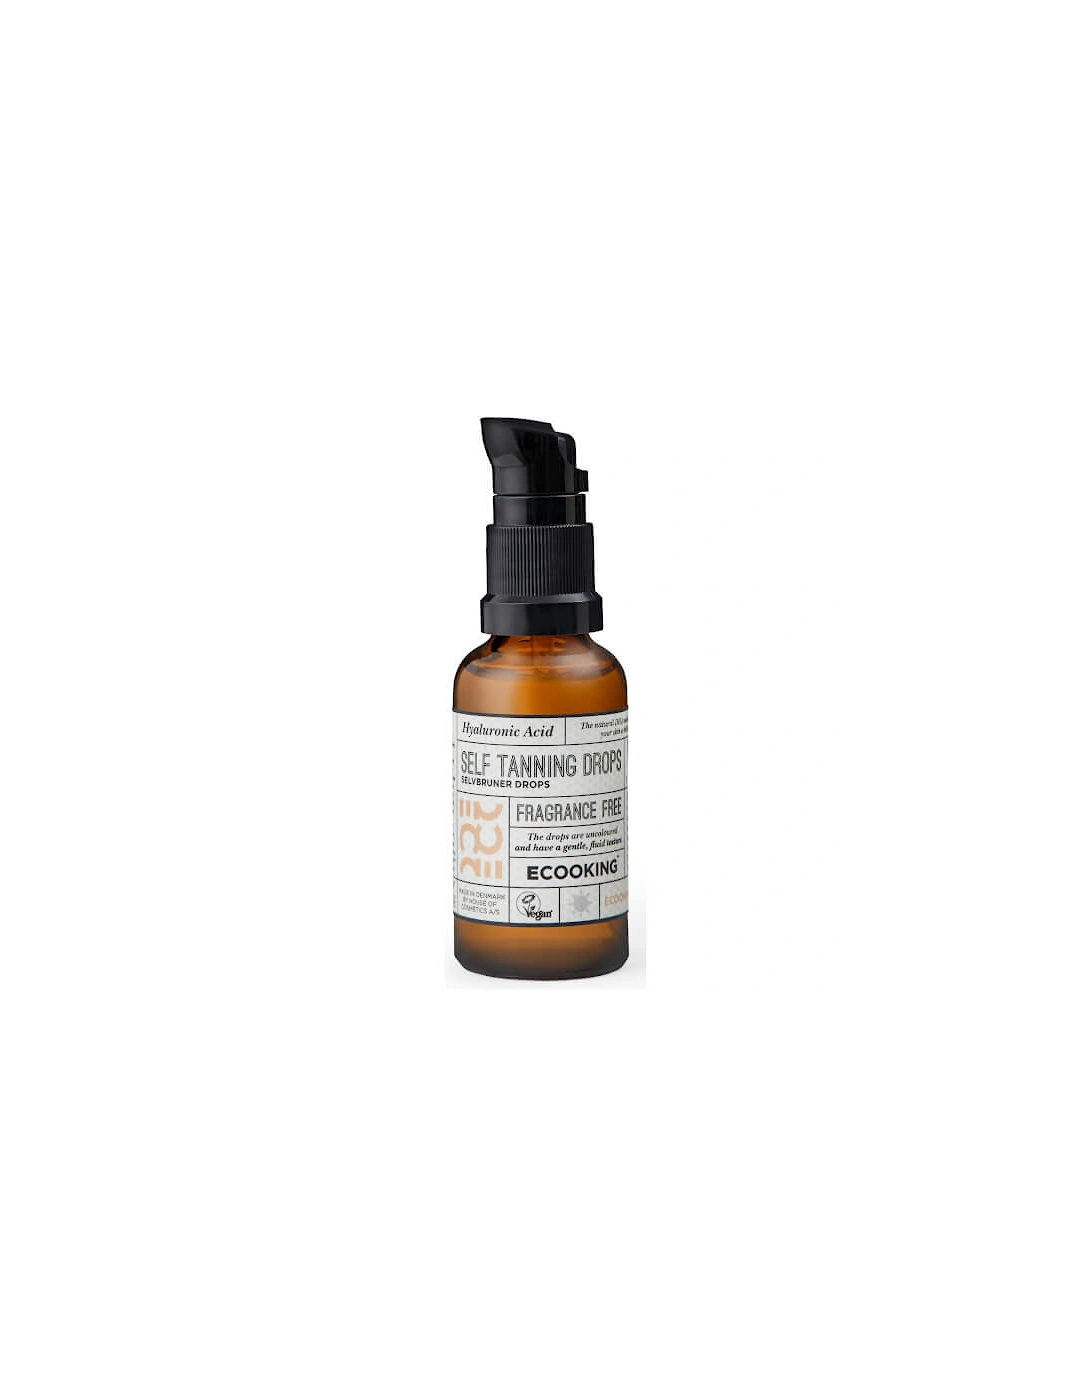 Ecooking Self Tanning Drops 30ml, 2 of 1